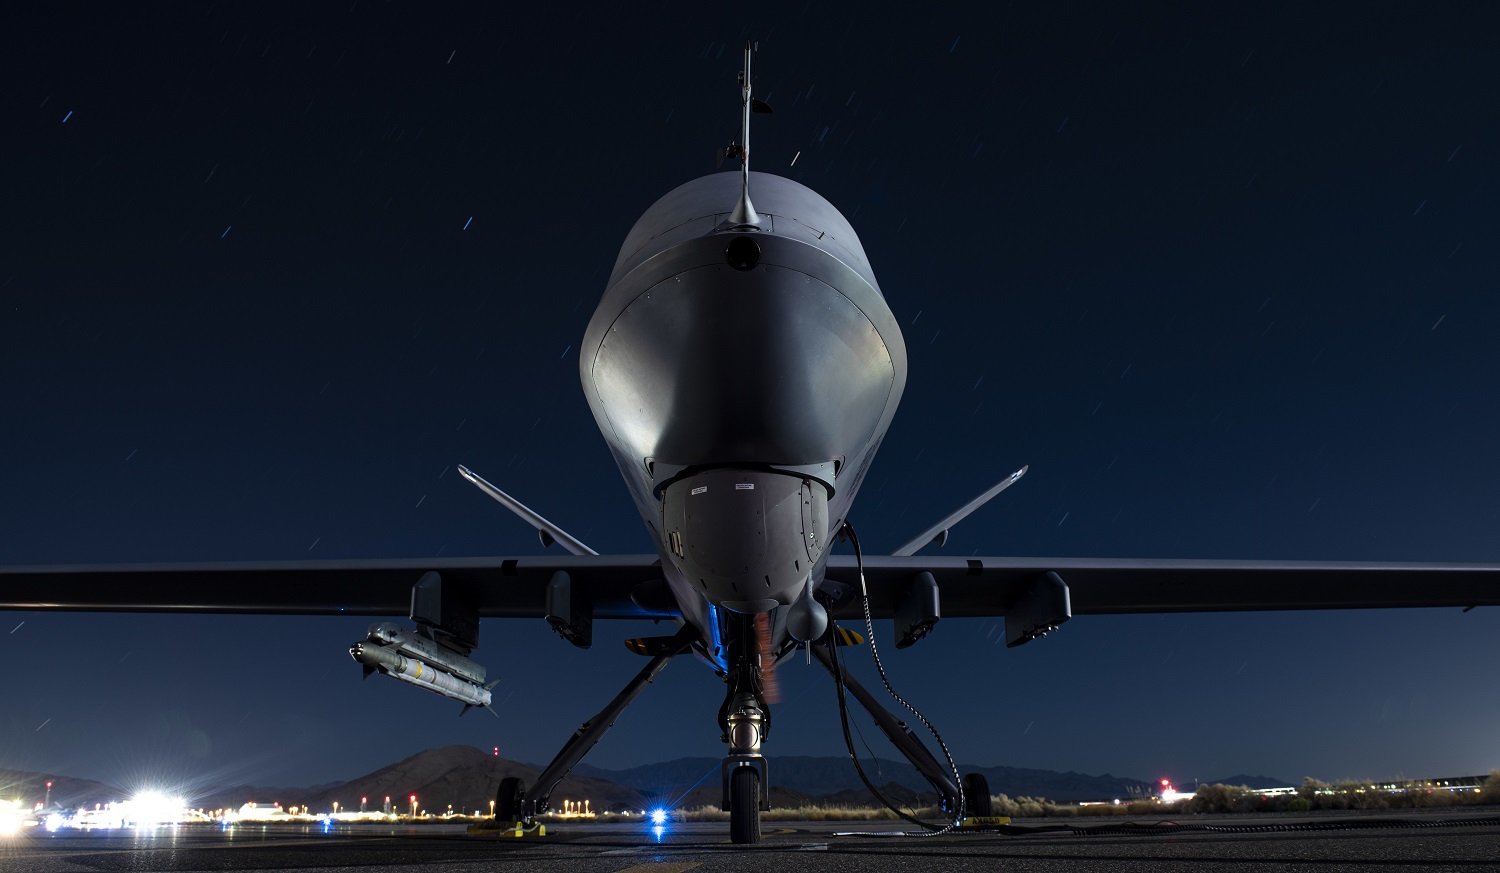 A U.S. Air Force MQ-9 Reaper assigned to the 556th Test and Evaluation Squadron armed with an AIM-9X missile sits on the ramp on September 3, 2020 ahead of the ABMS Onramp #2.